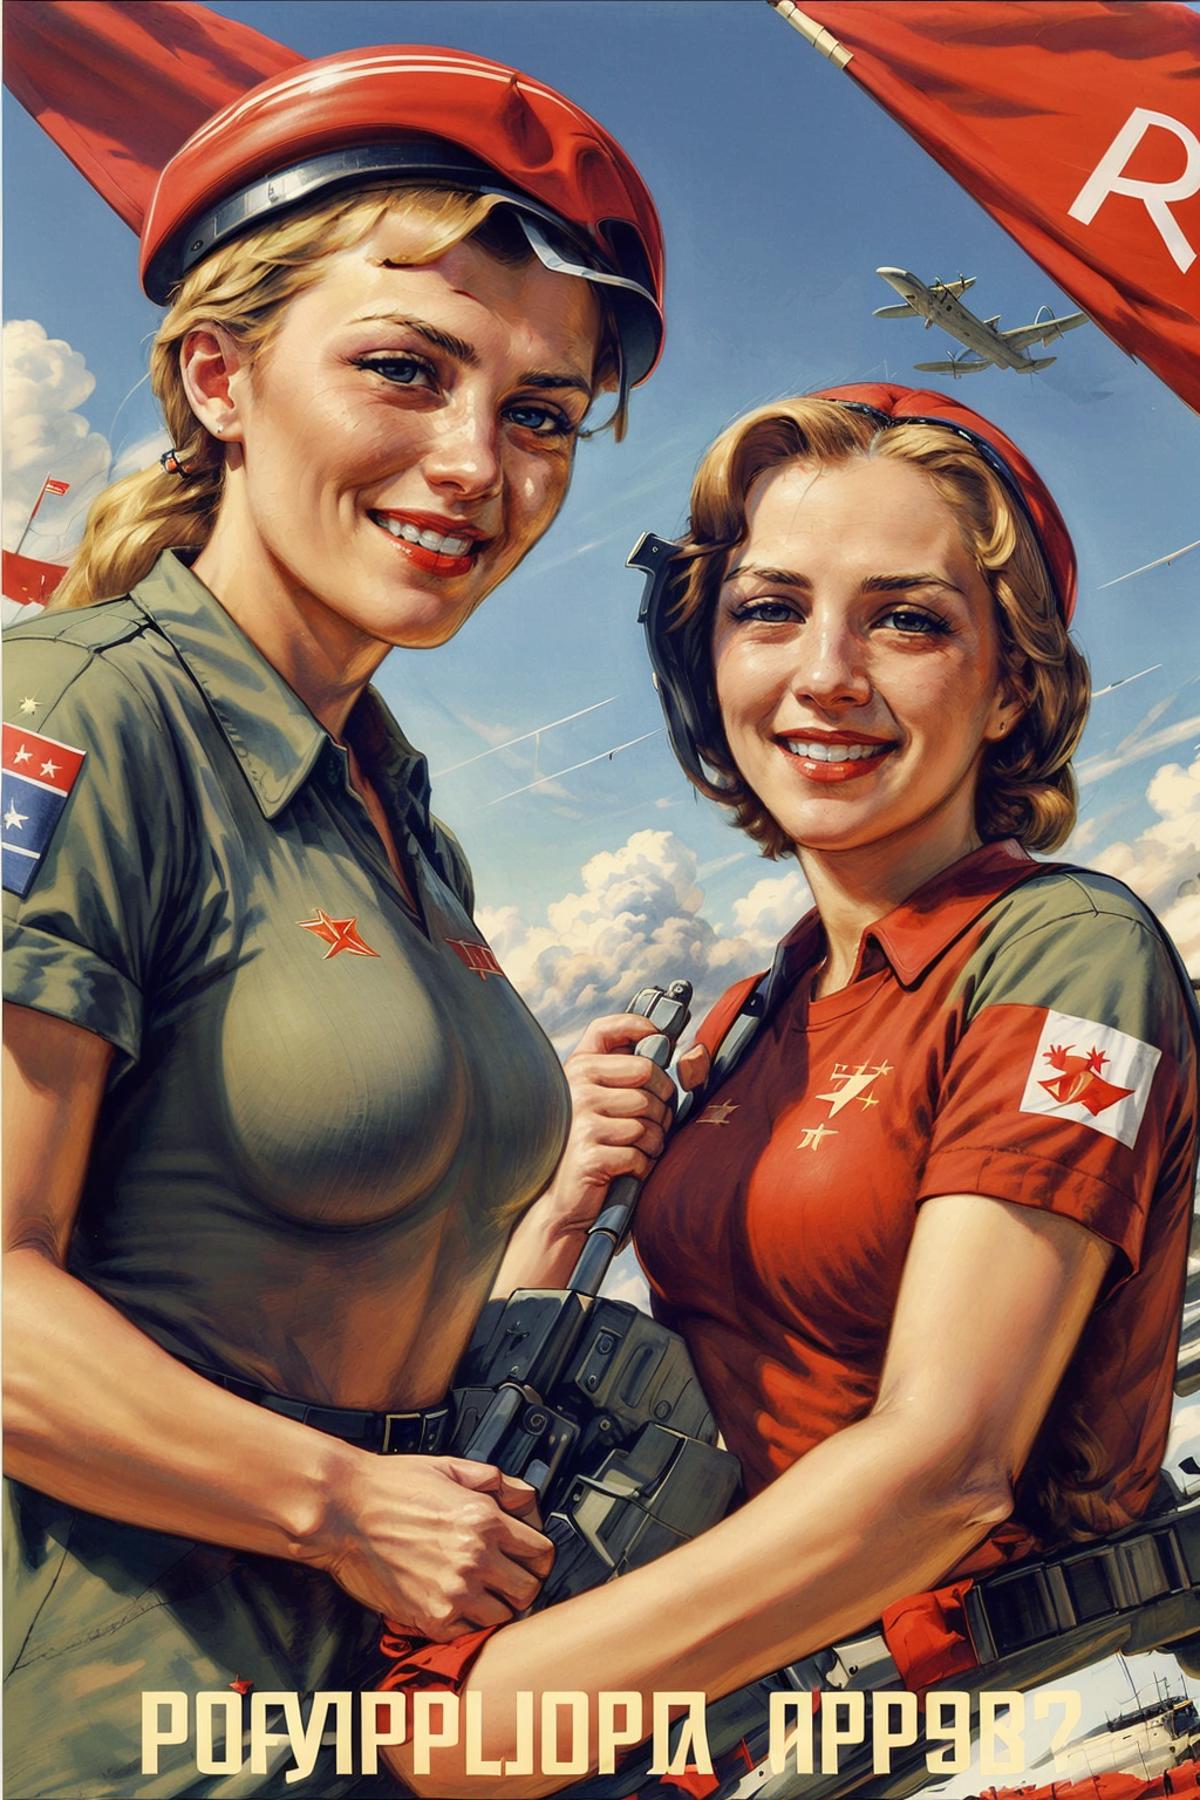 Two Women in Military Uniforms Holding Guns and Smiling